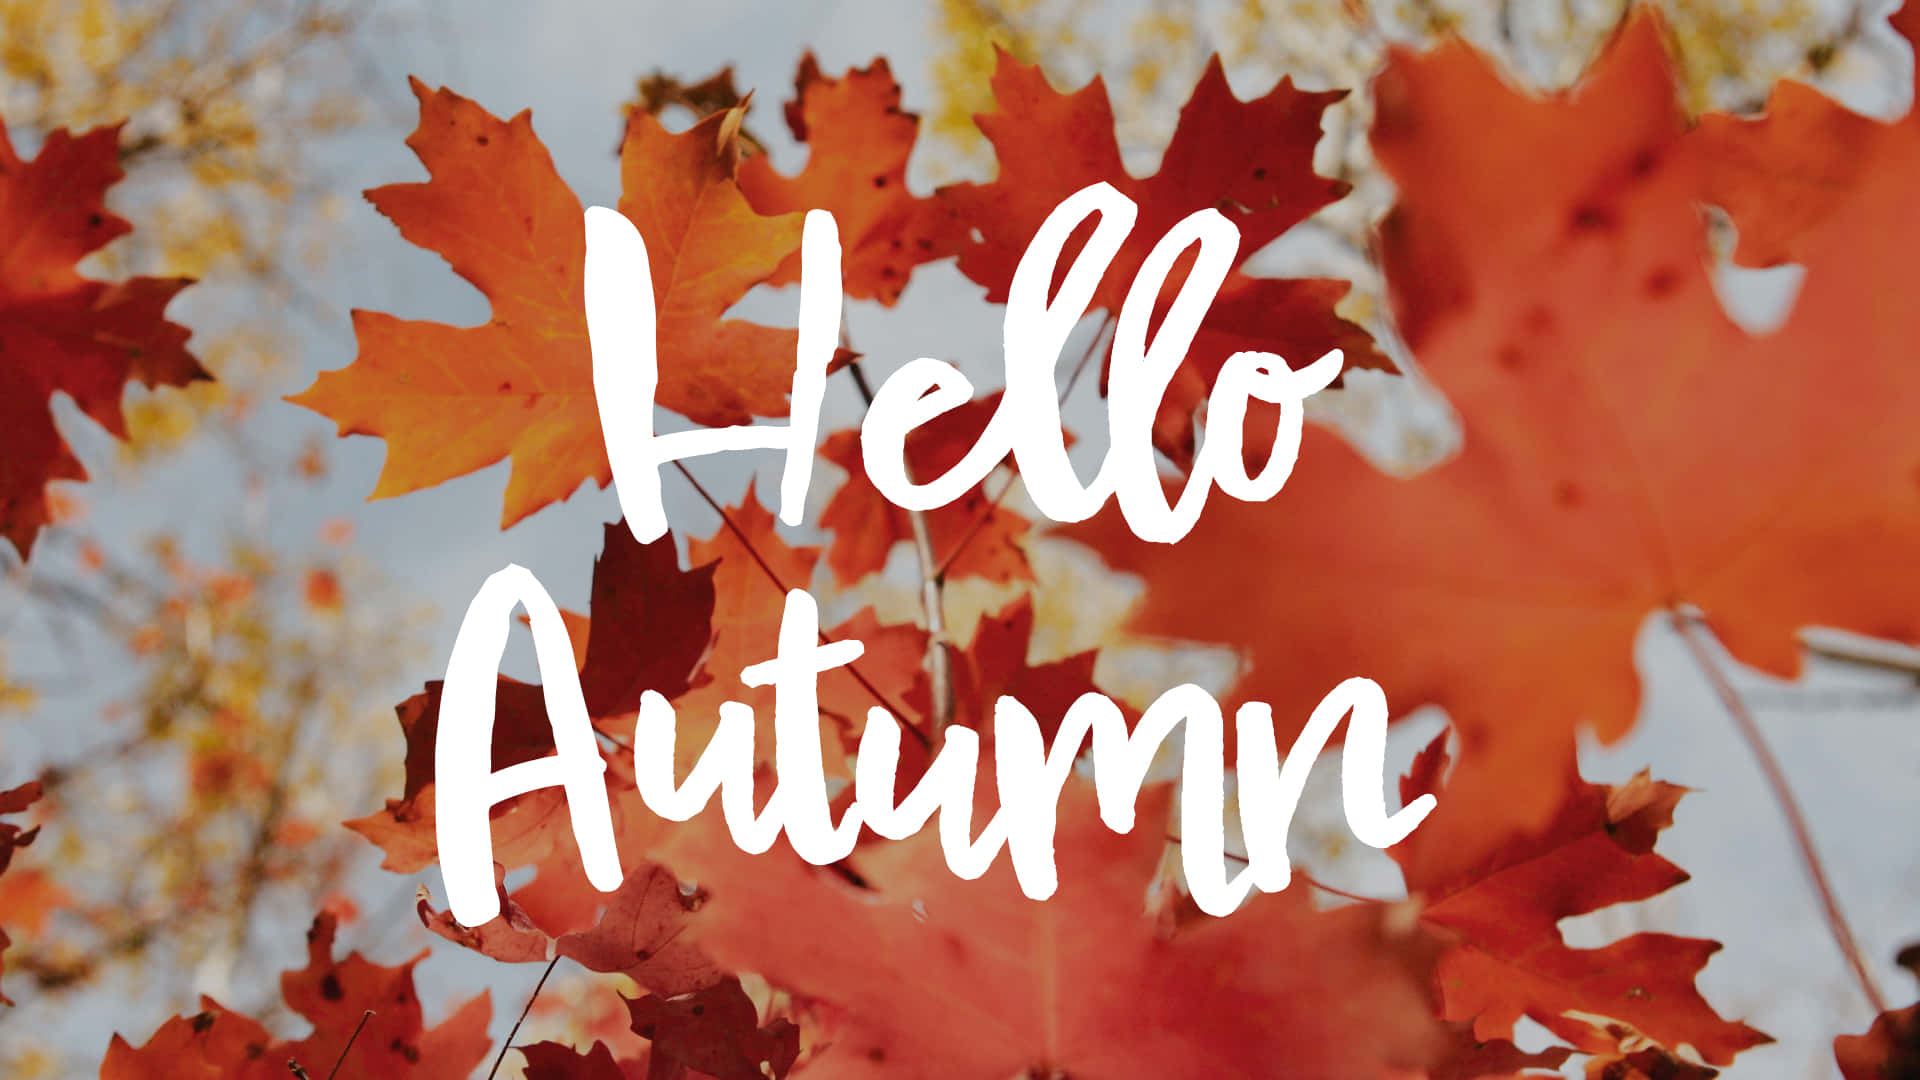 Hello Fall- A time for transitioning into a season of warmer colours. Wallpaper